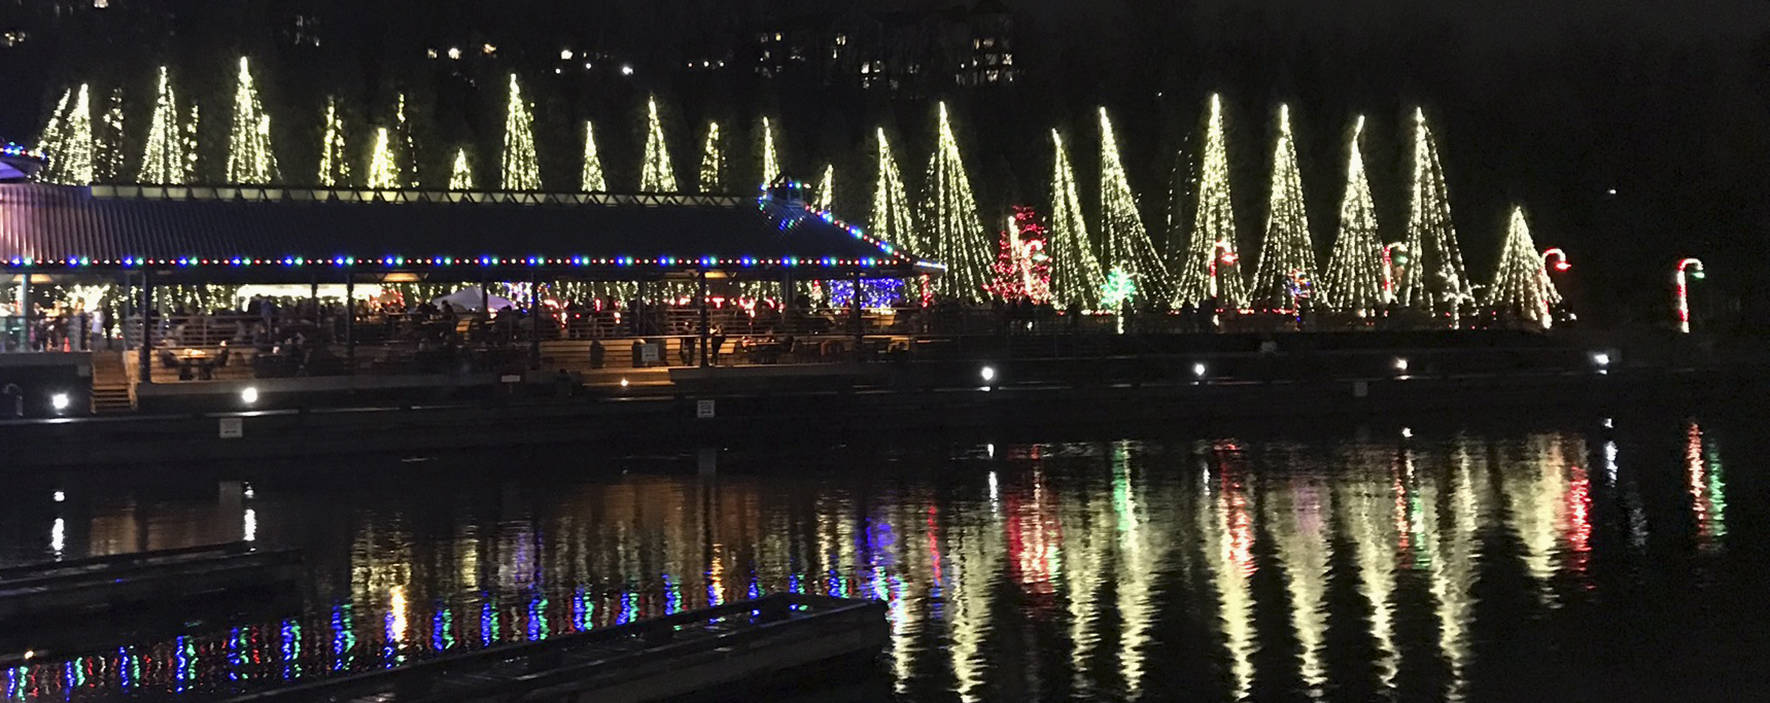 Gallery: Holiday cheer lights up the park